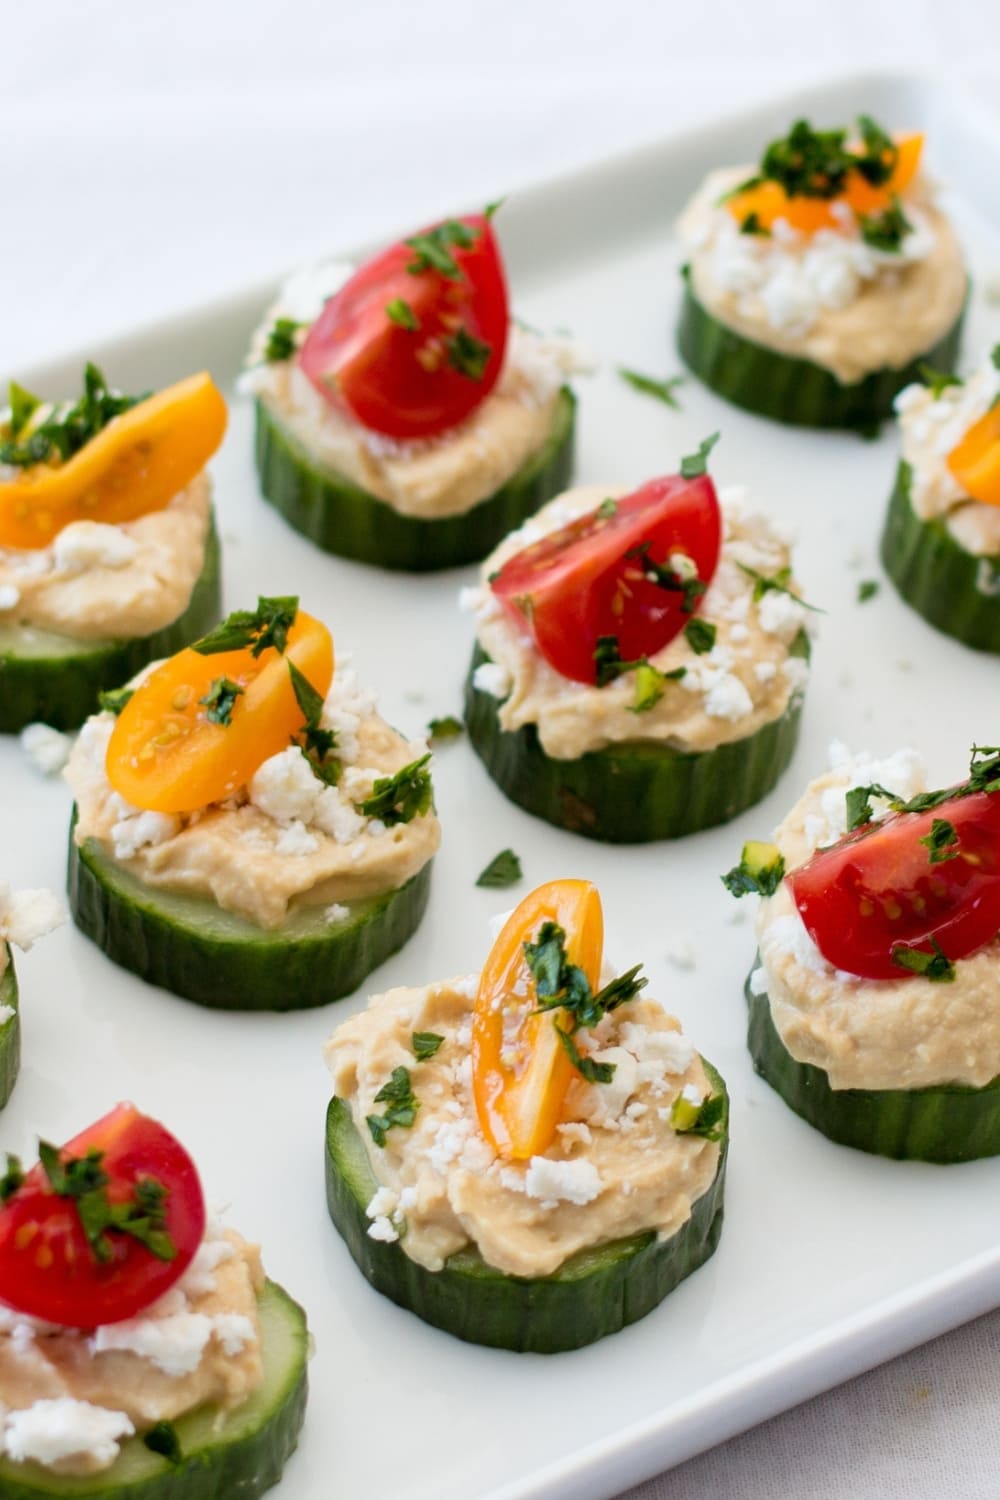 20 Easy Cucumber Appetizers: Cucumber and Tomato Bites with Hummus